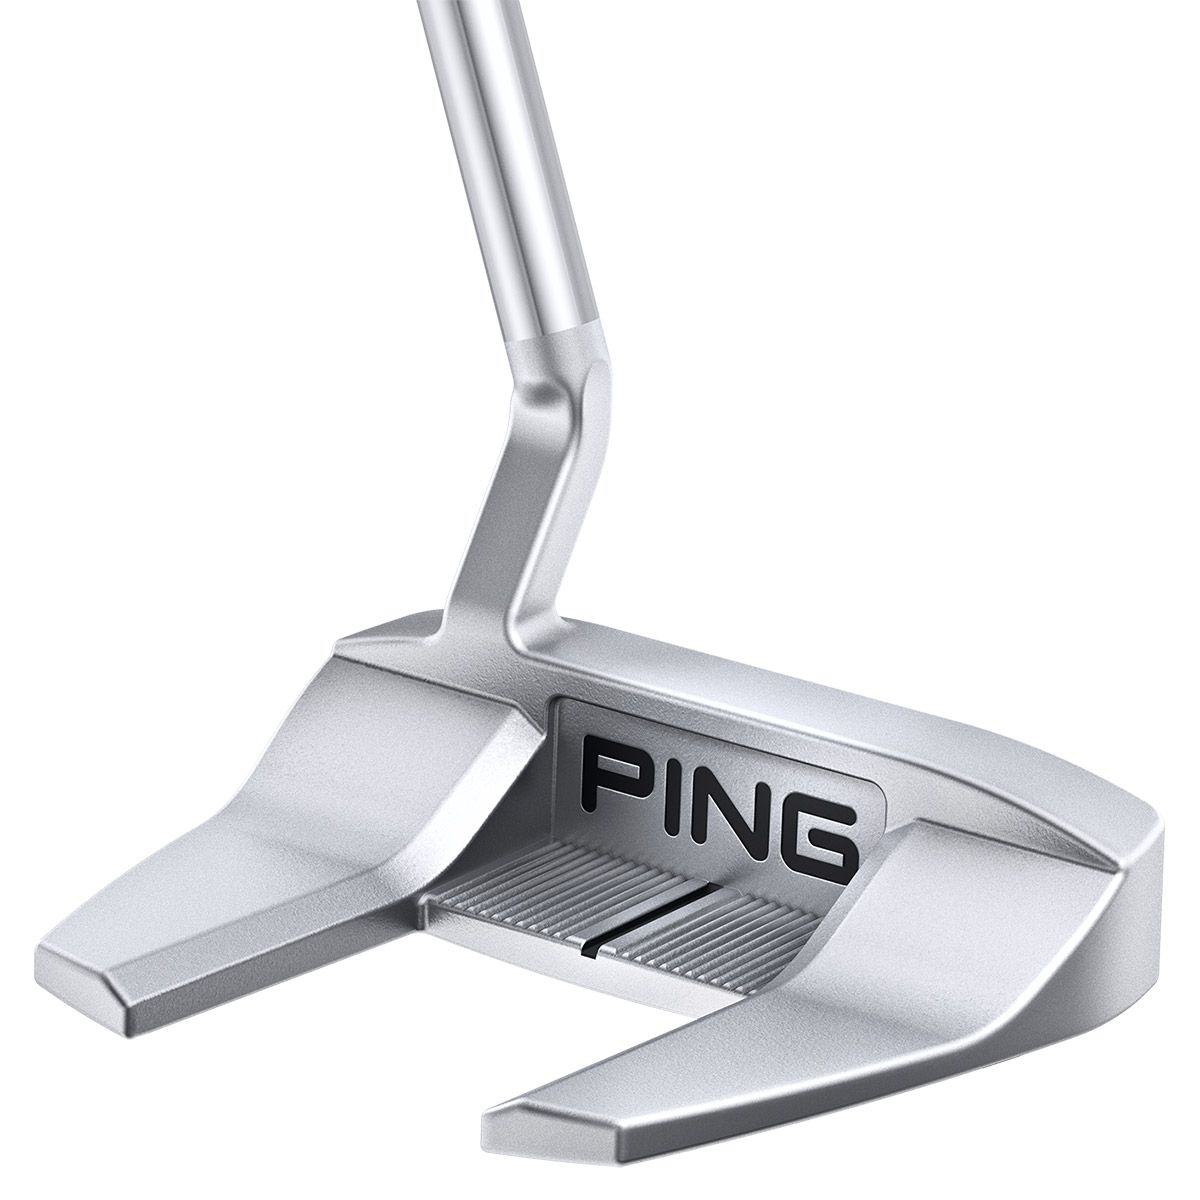 PING Sigma 2 Tyne 4 Platinum Putter from american golf